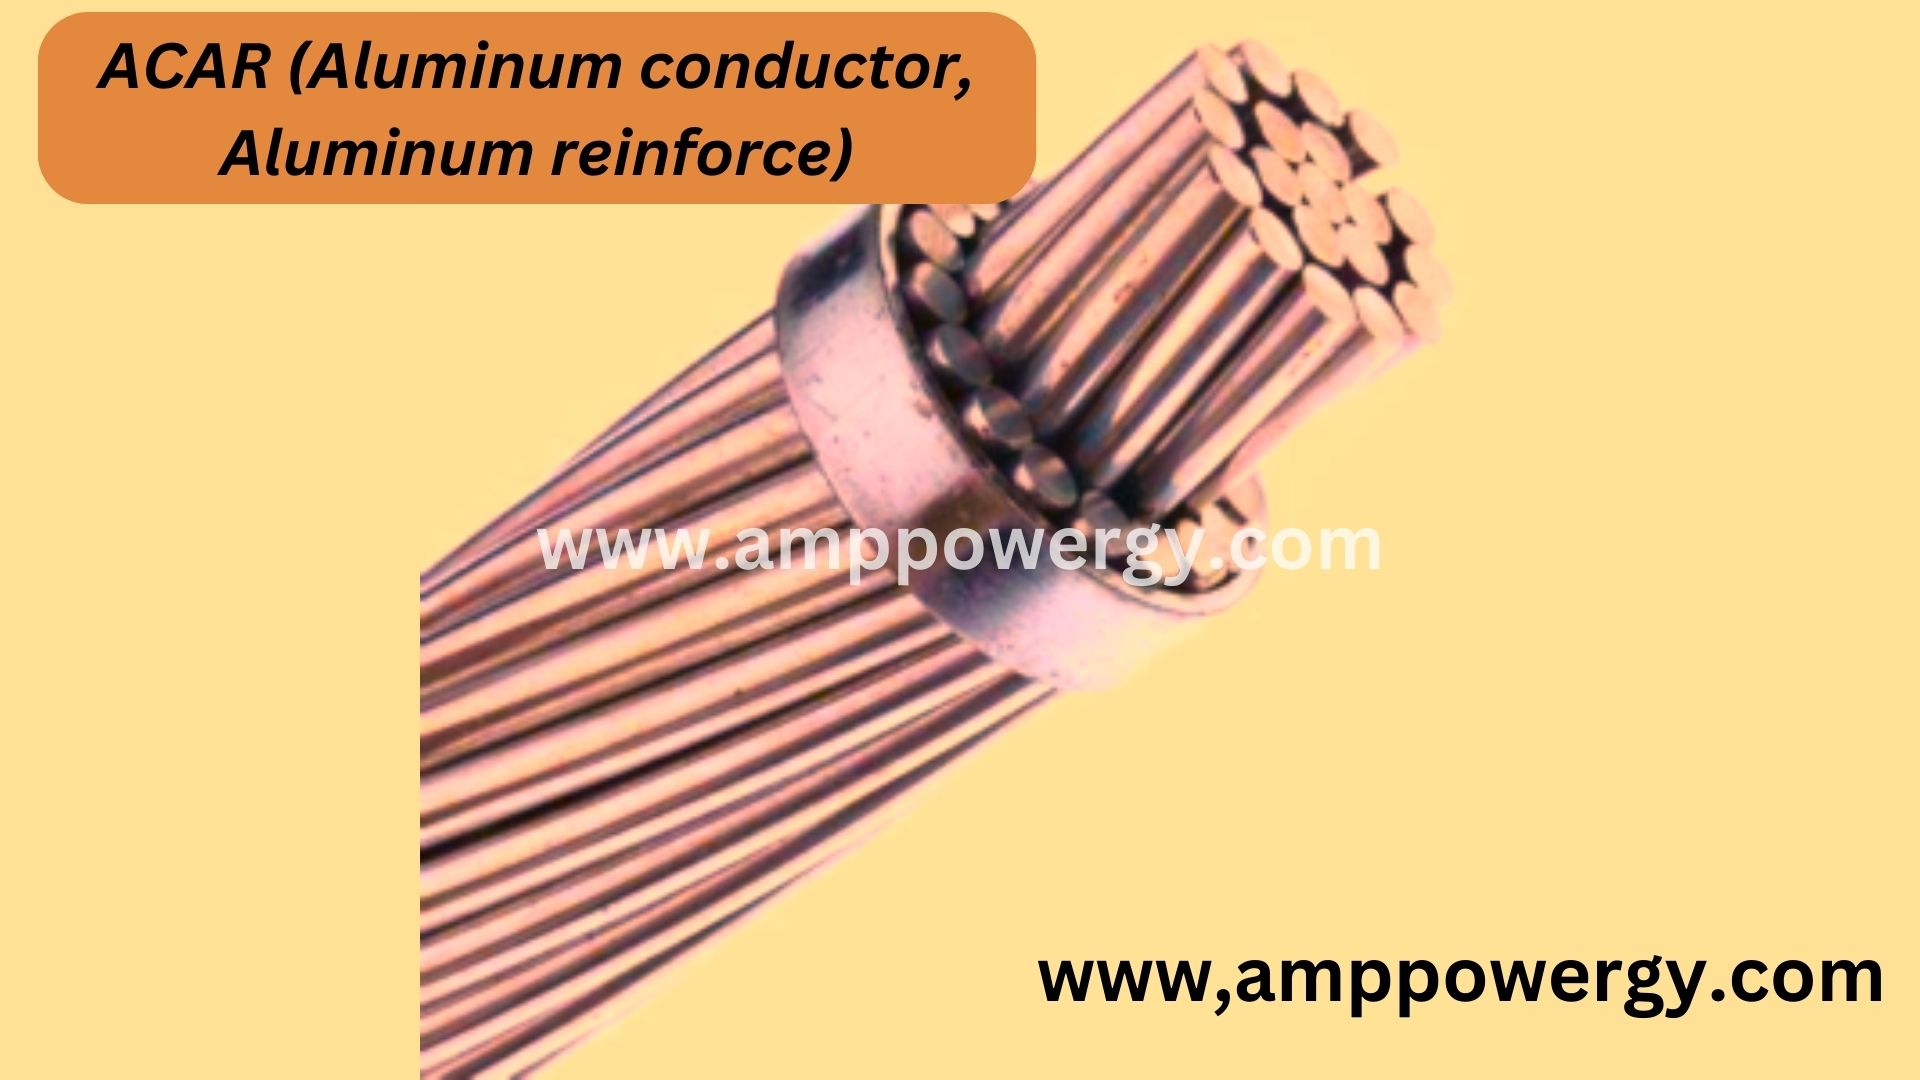 Overhead Conductor, Transmission and Distribution conductor, Advantage and Disadvantage